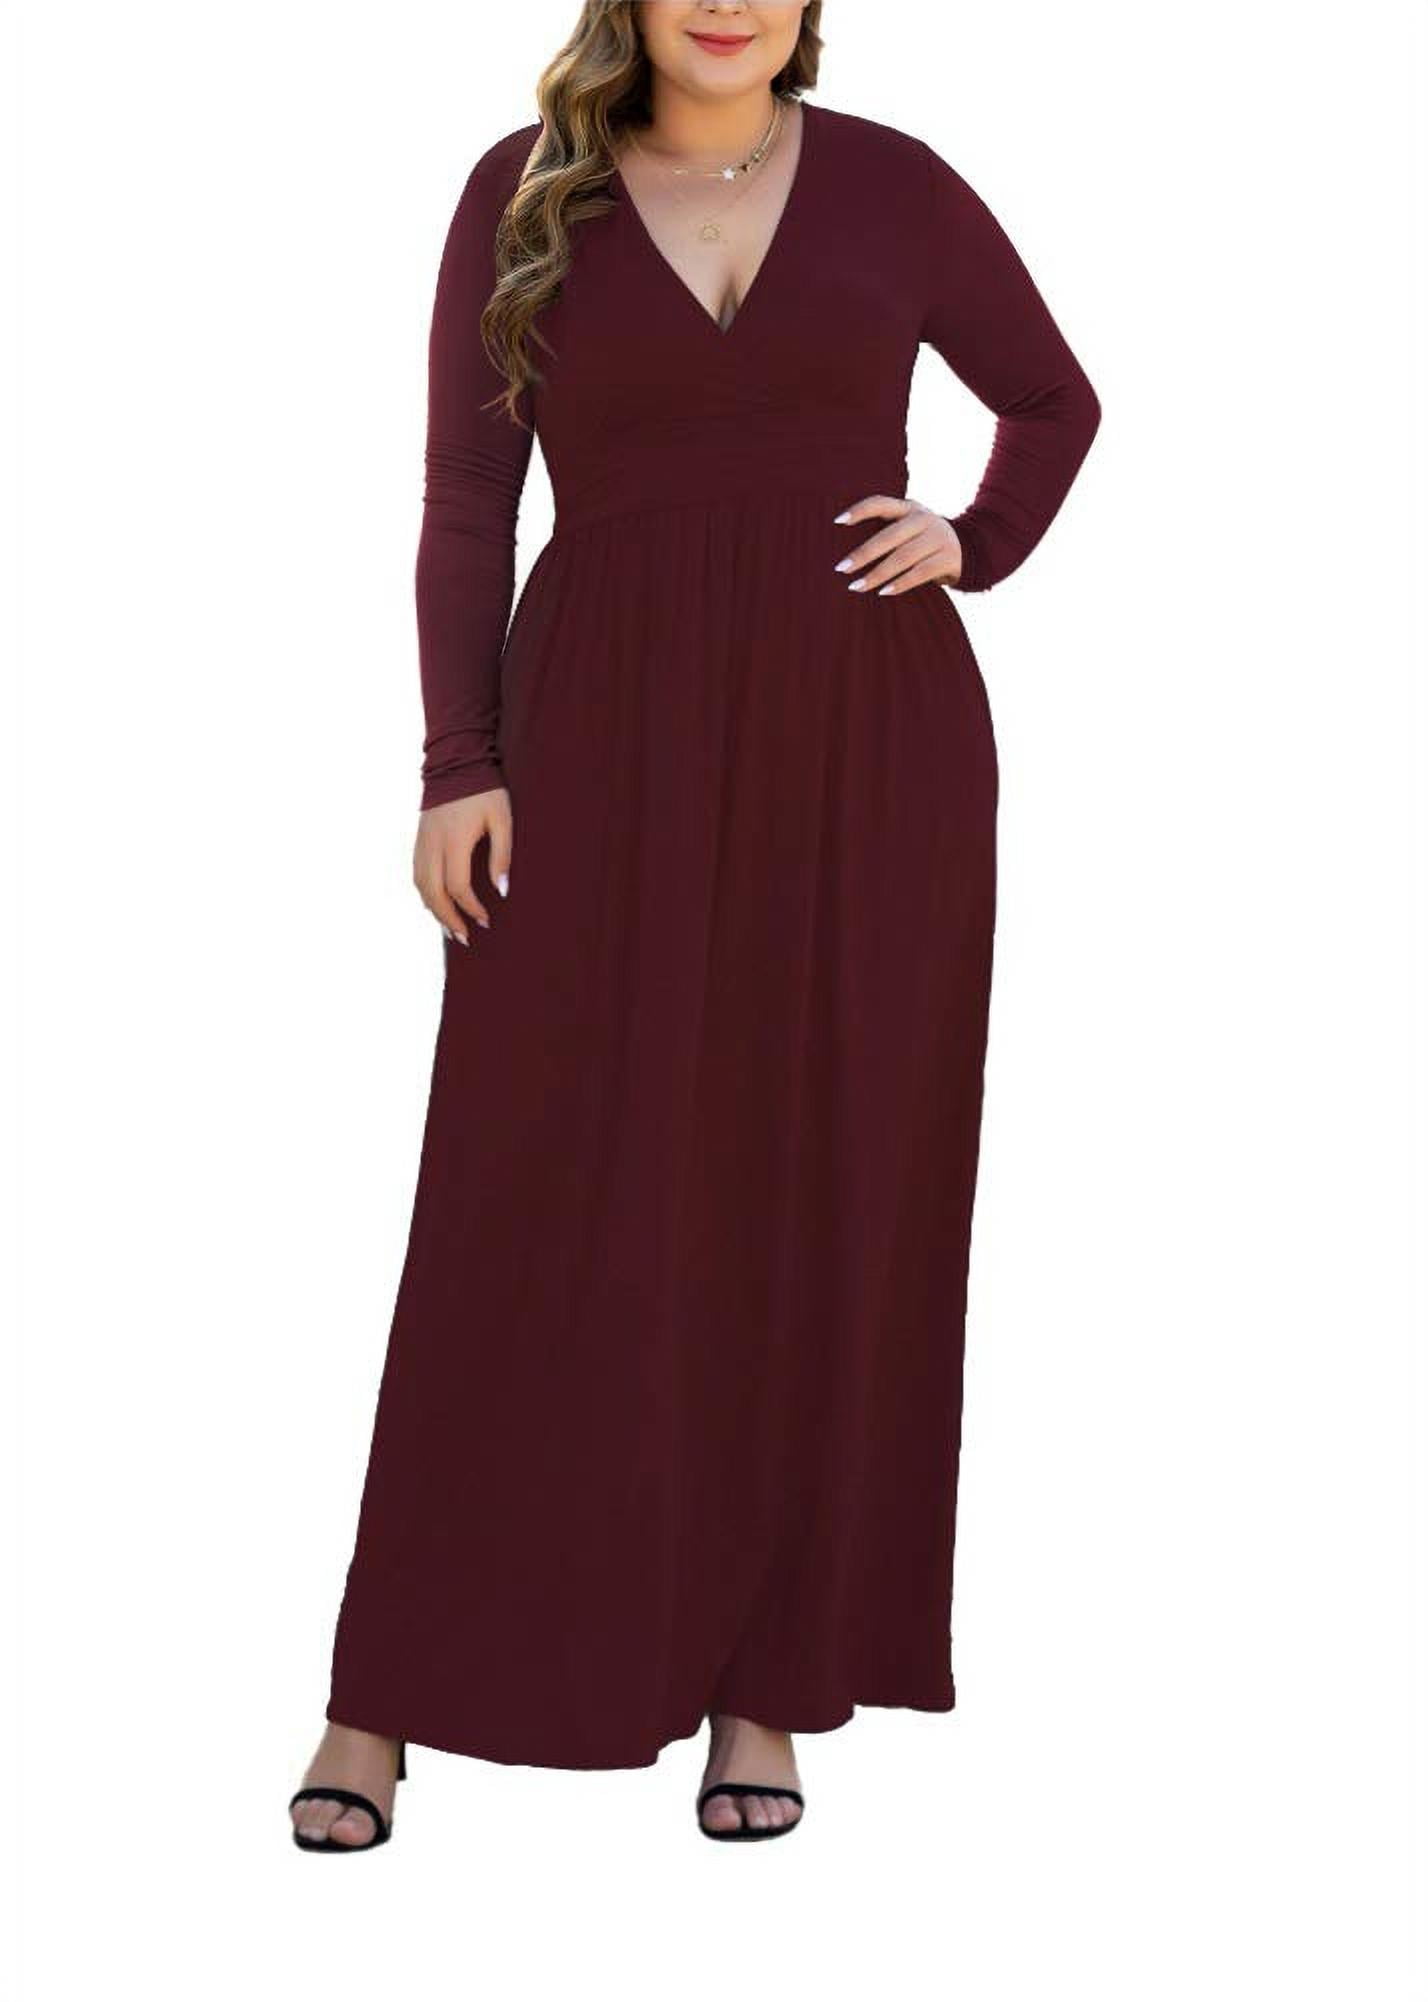 PCEAIIH Women's Plus Size Causal Maxi Dresses with Pockets Long Sleeve ...